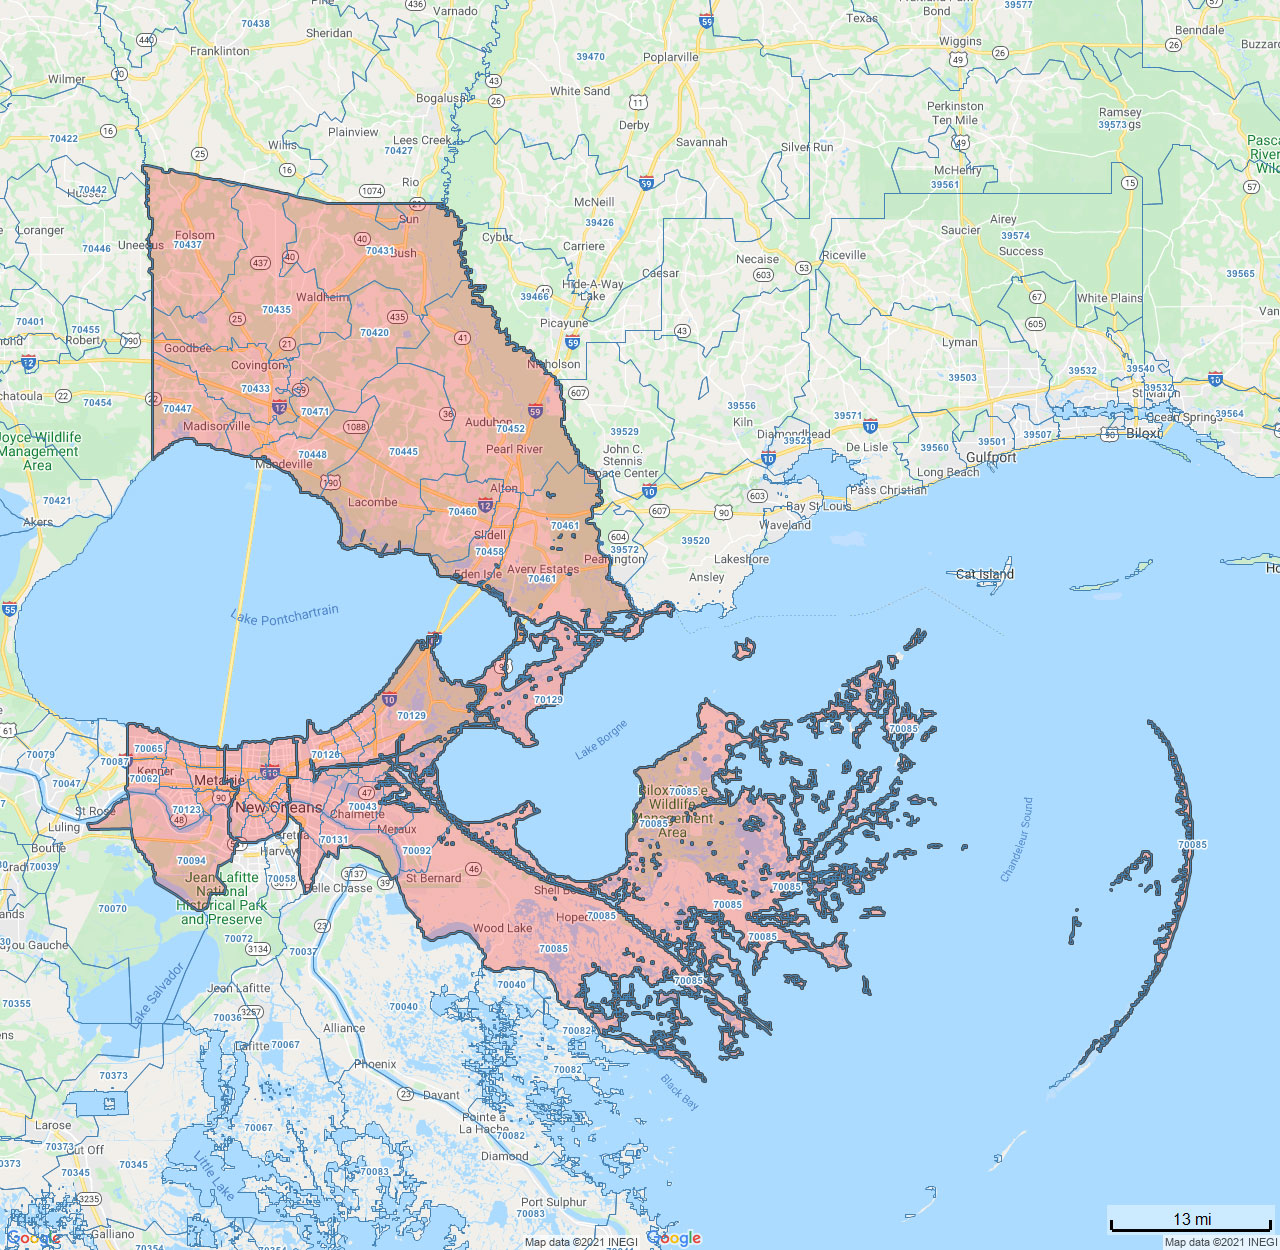 All Dry Services Area Coverage Map for New Orleans, LA